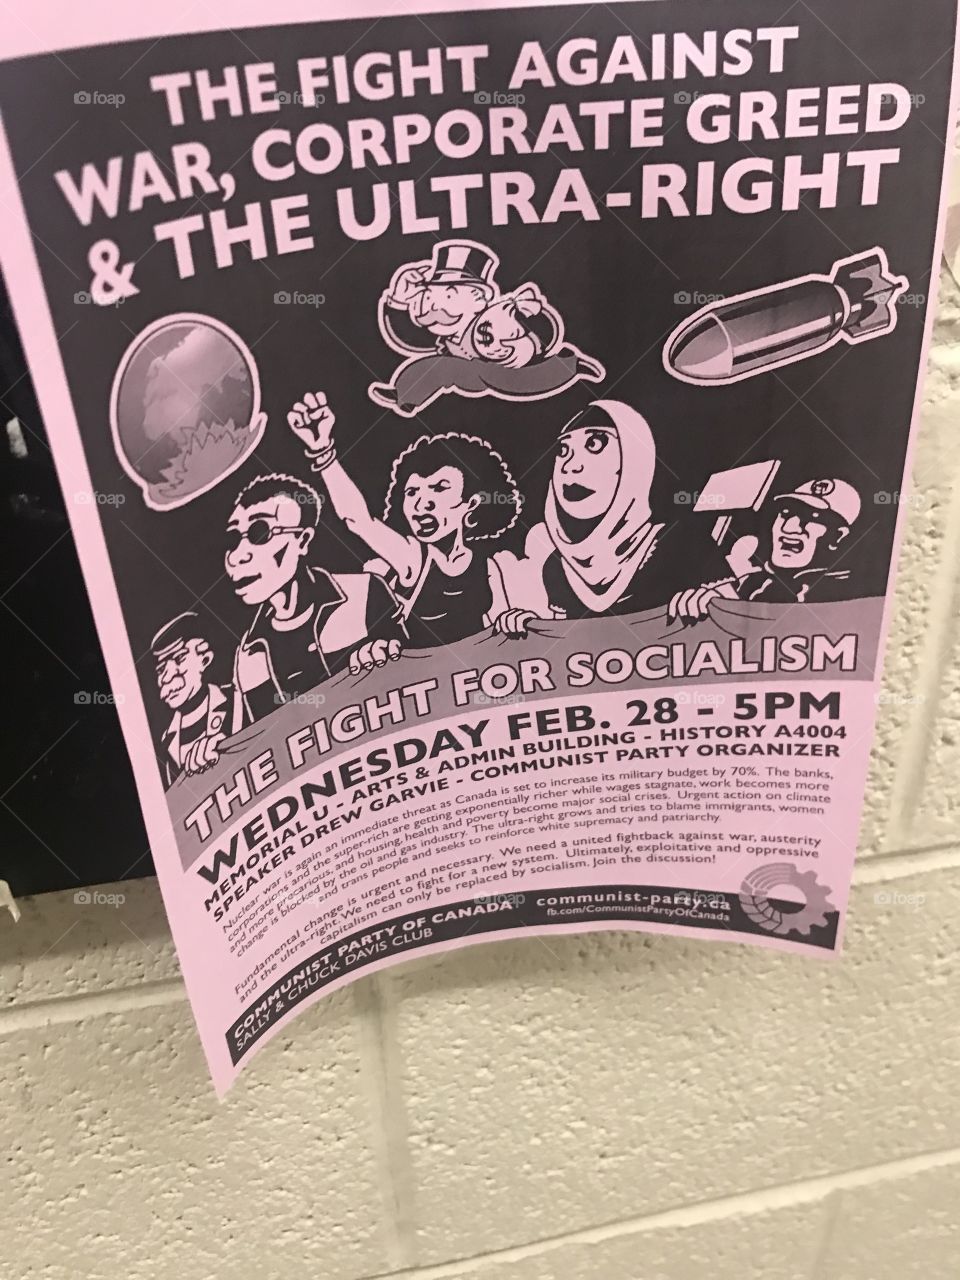 A poster advertising an event of the communist party of Canada’s chuck sally Davis club, the St. John’s, NL (Newfoundland and Labrador), Atlantic canadian chapter of that federal political chapter. The theme is current events and rise of far right